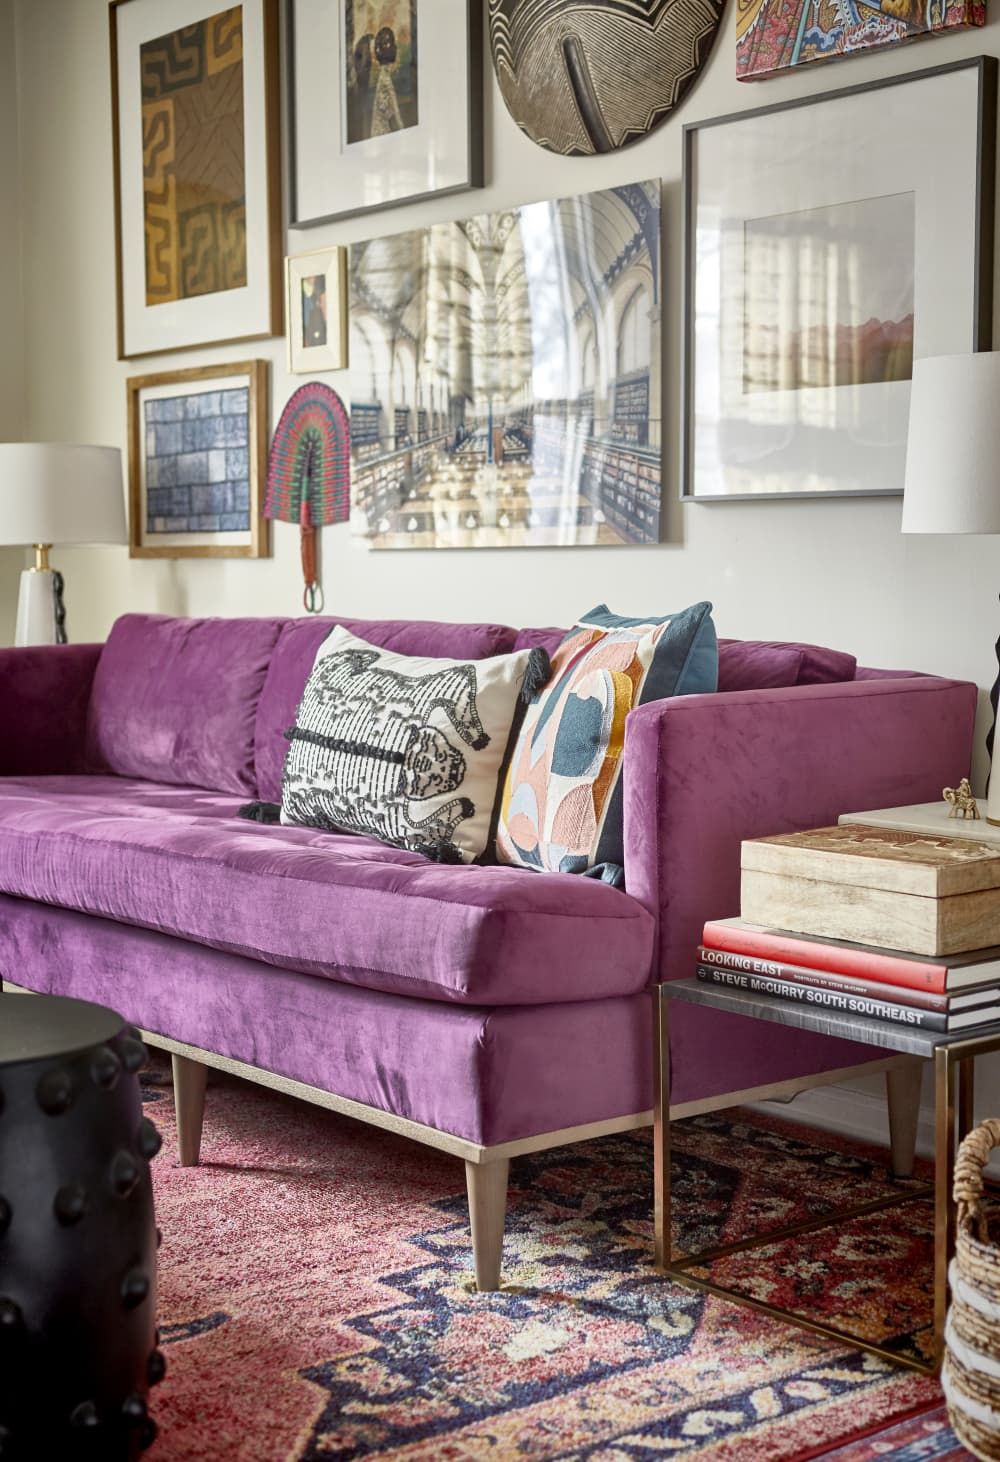 Why a Purple Sofa Could Be the Perfect
Pop of Color for Your Space